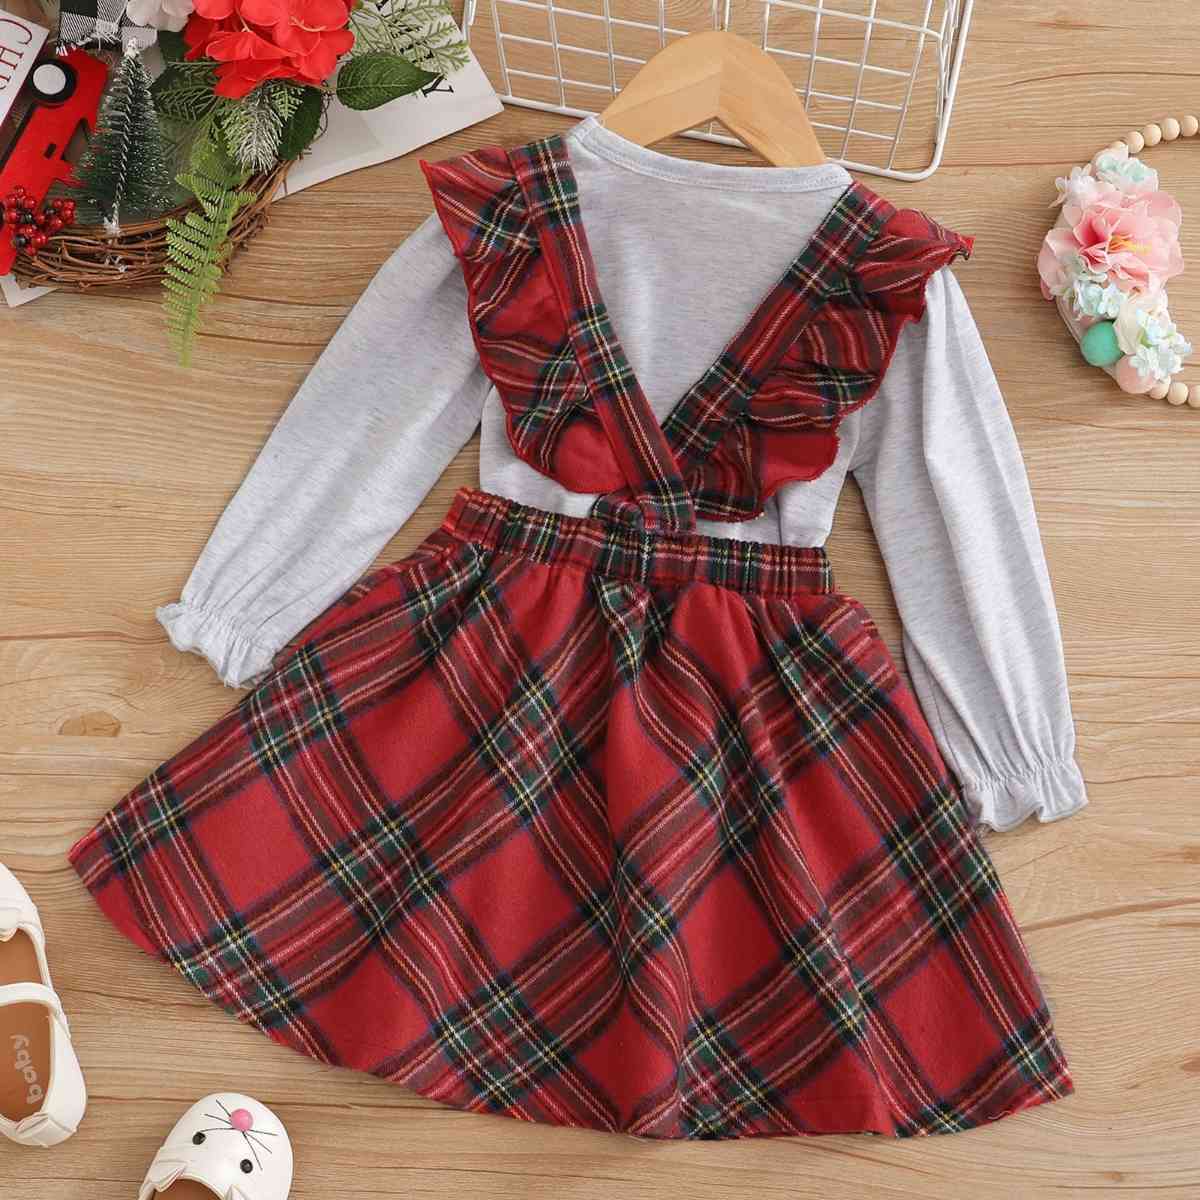 Graphic Top and Plaid Overall Skirt Set for Toddler Girl  Krazy Heart Designs Boutique   